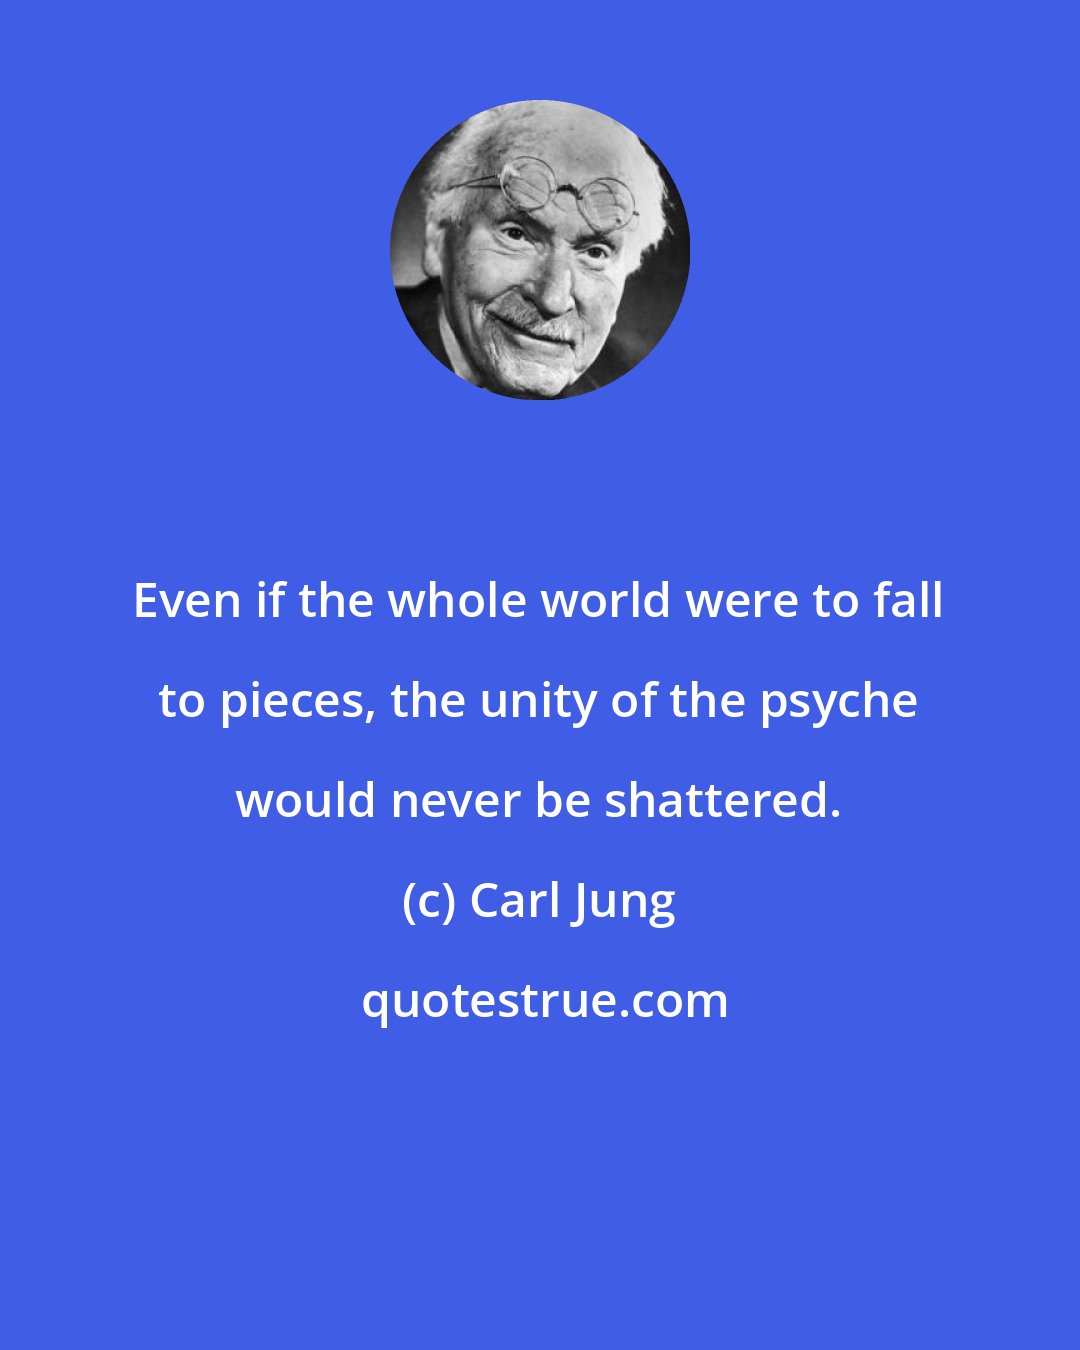 Carl Jung: Even if the whole world were to fall to pieces, the unity of the psyche would never be shattered.